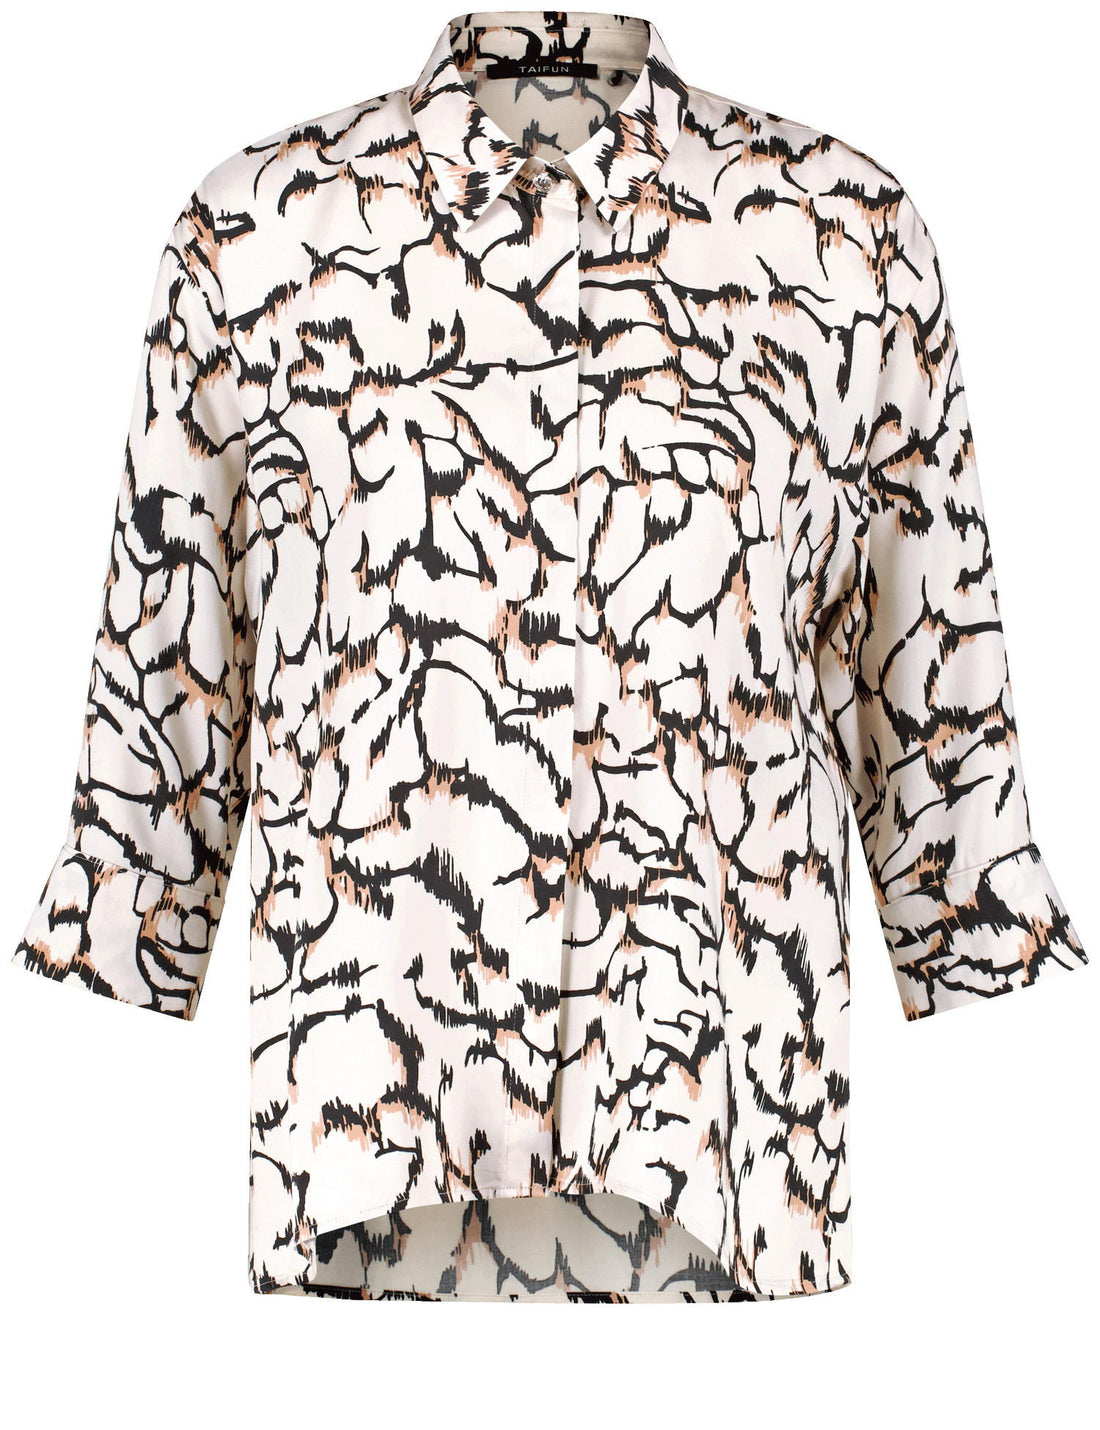 Blouse With An All-Over Print_560322-11017_9452_02